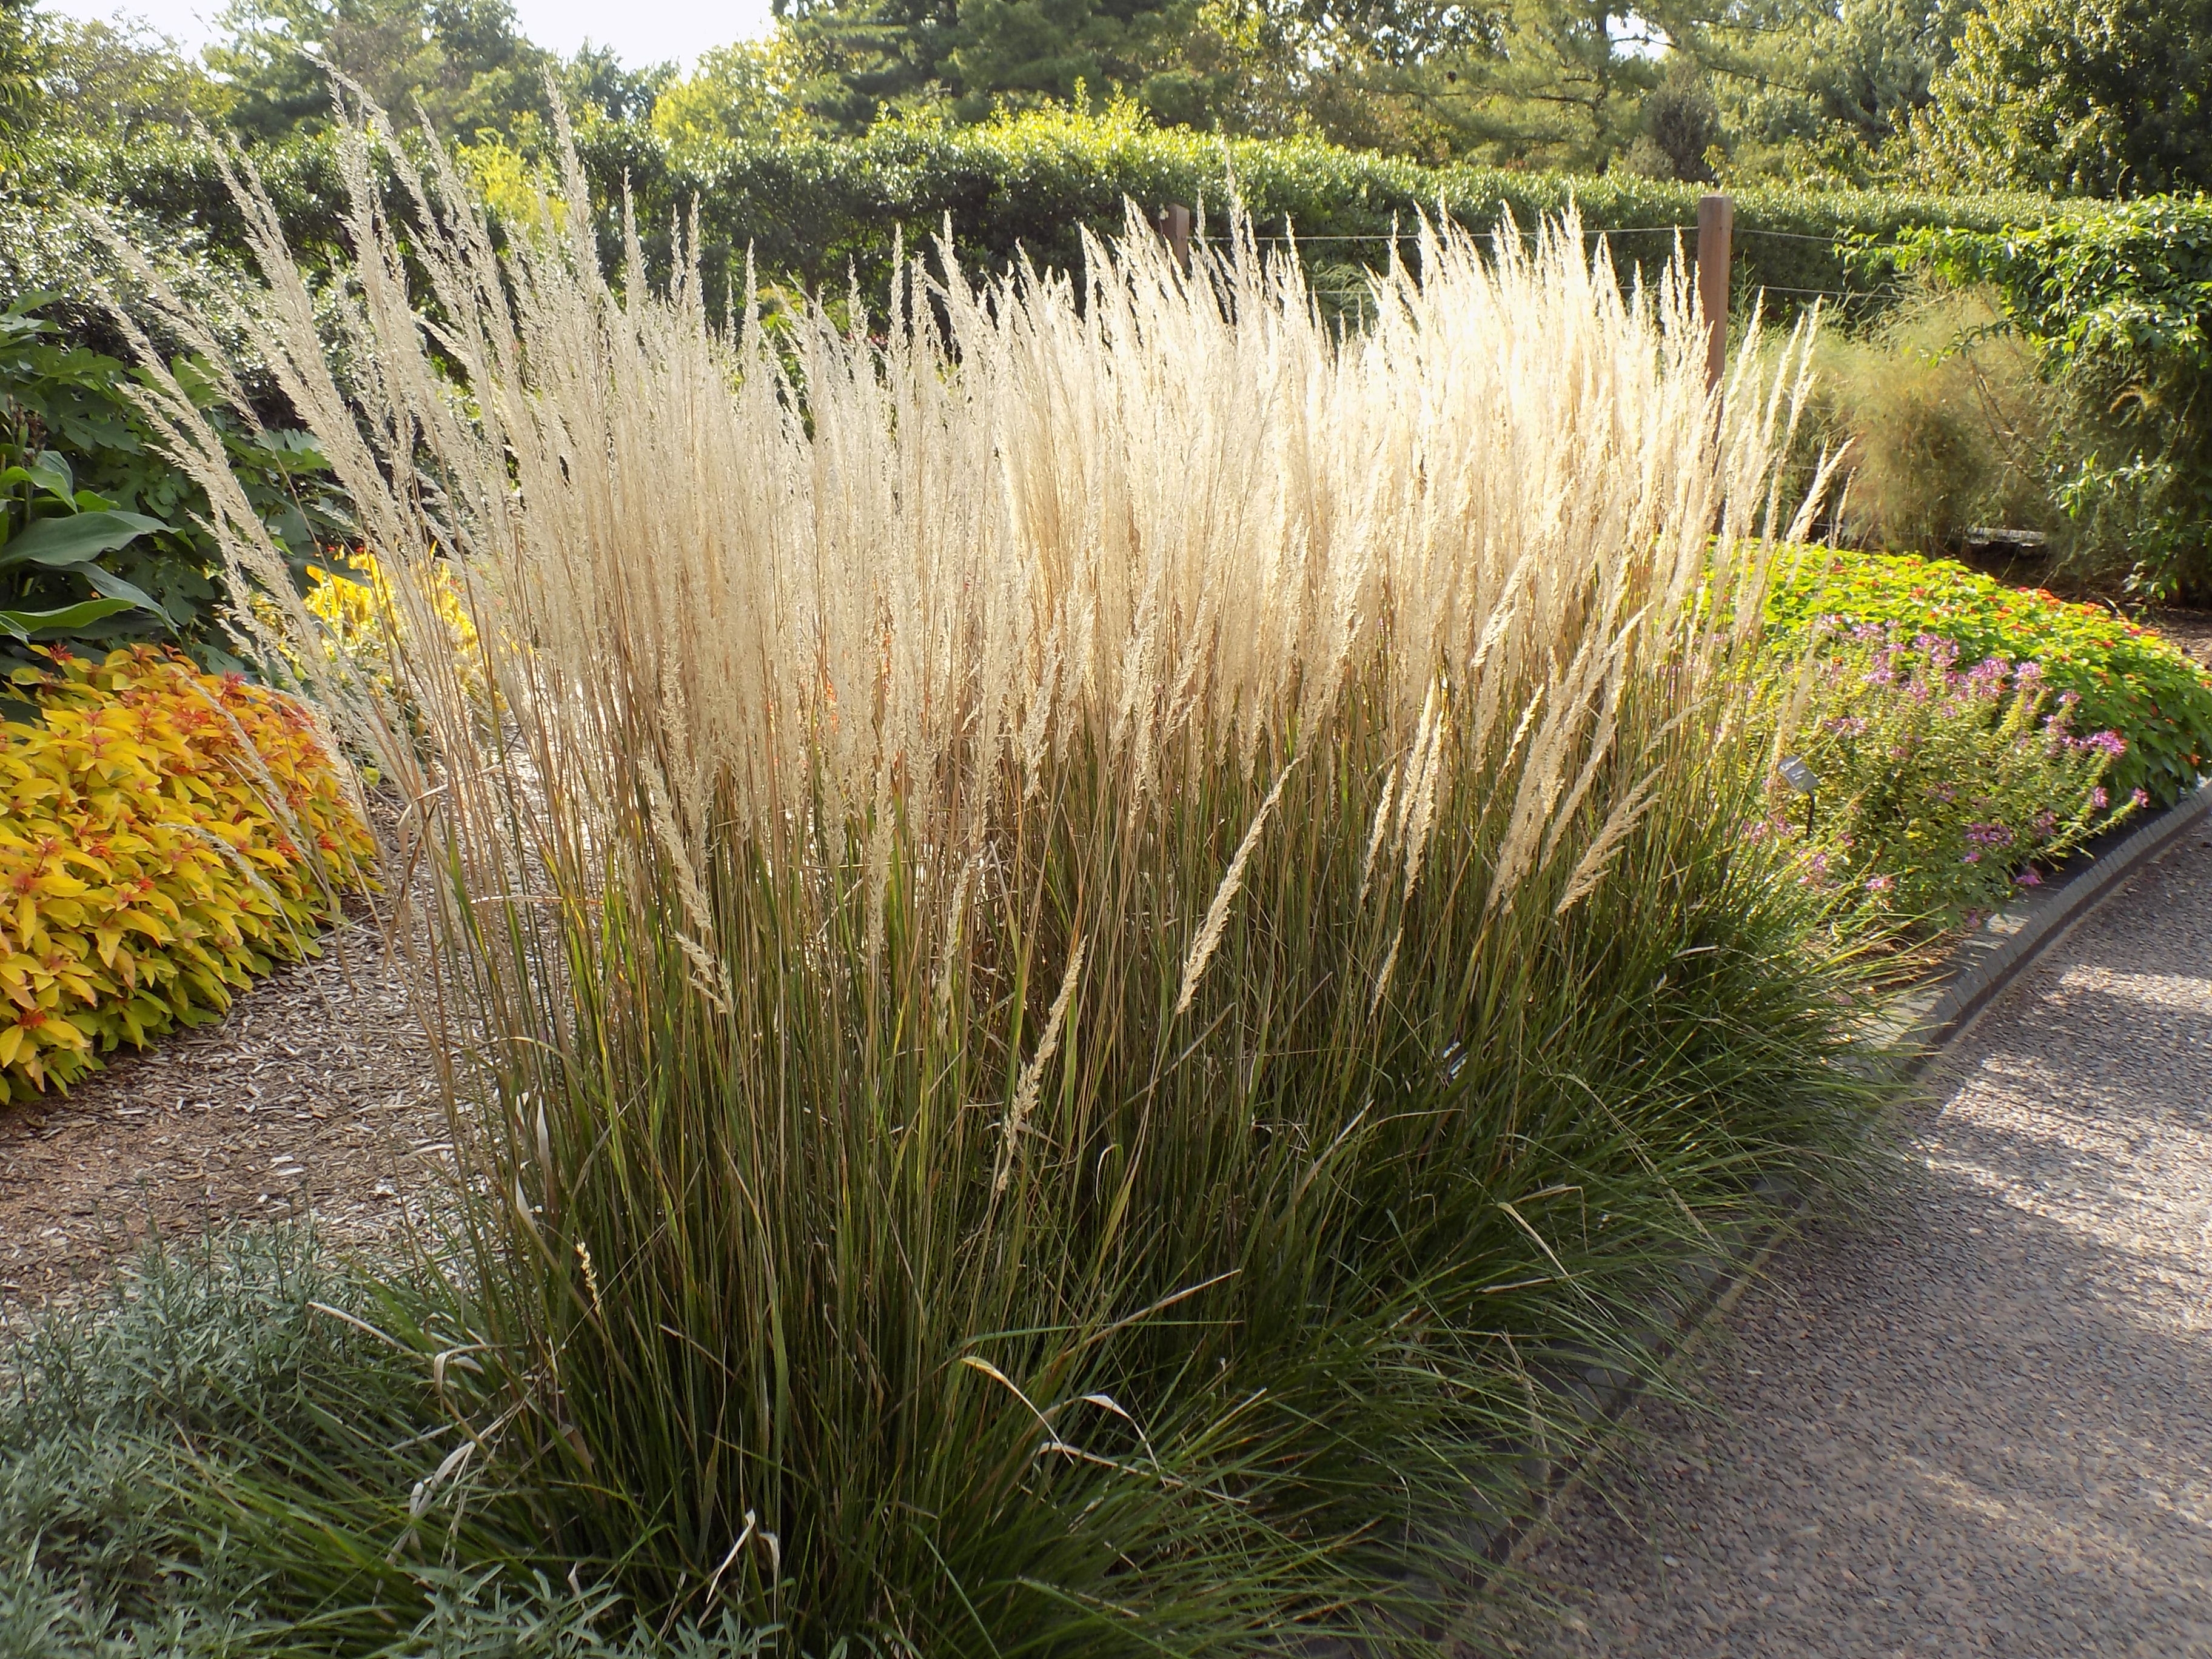 Ornamental Grass Collection Colourful Low Maintenance Miscanthus Garden Perennial Plants Ideal for Cottage Gardens & Borders 6 x Plants in 9cm Pots by Thompson & Morgan